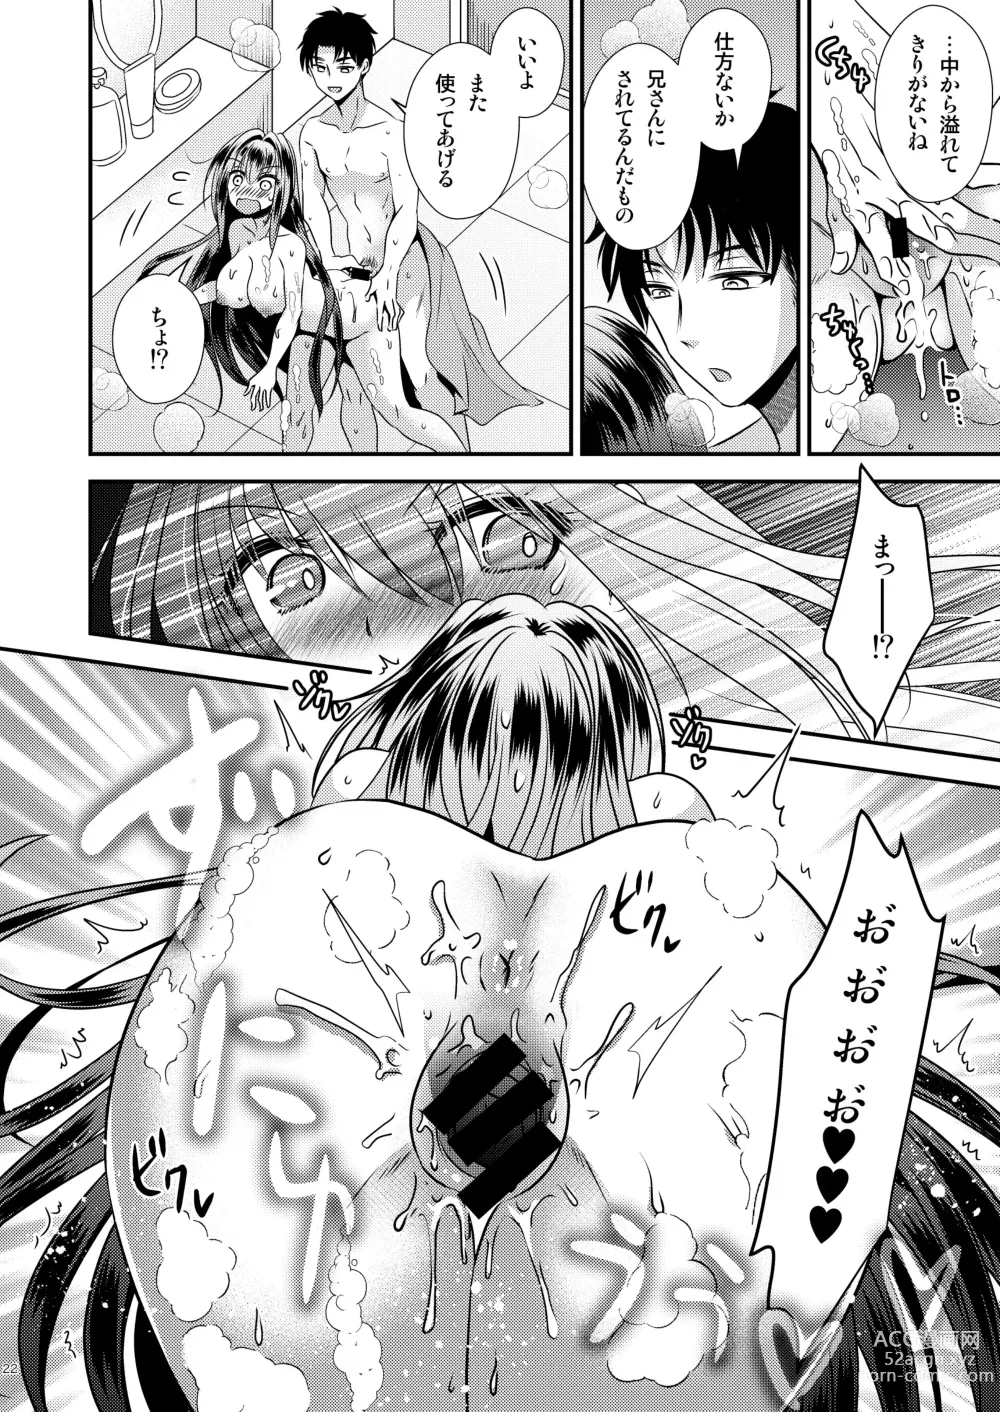 Page 22 of doujinshi 性欲処理に使っていた妹と入れ替わった兄